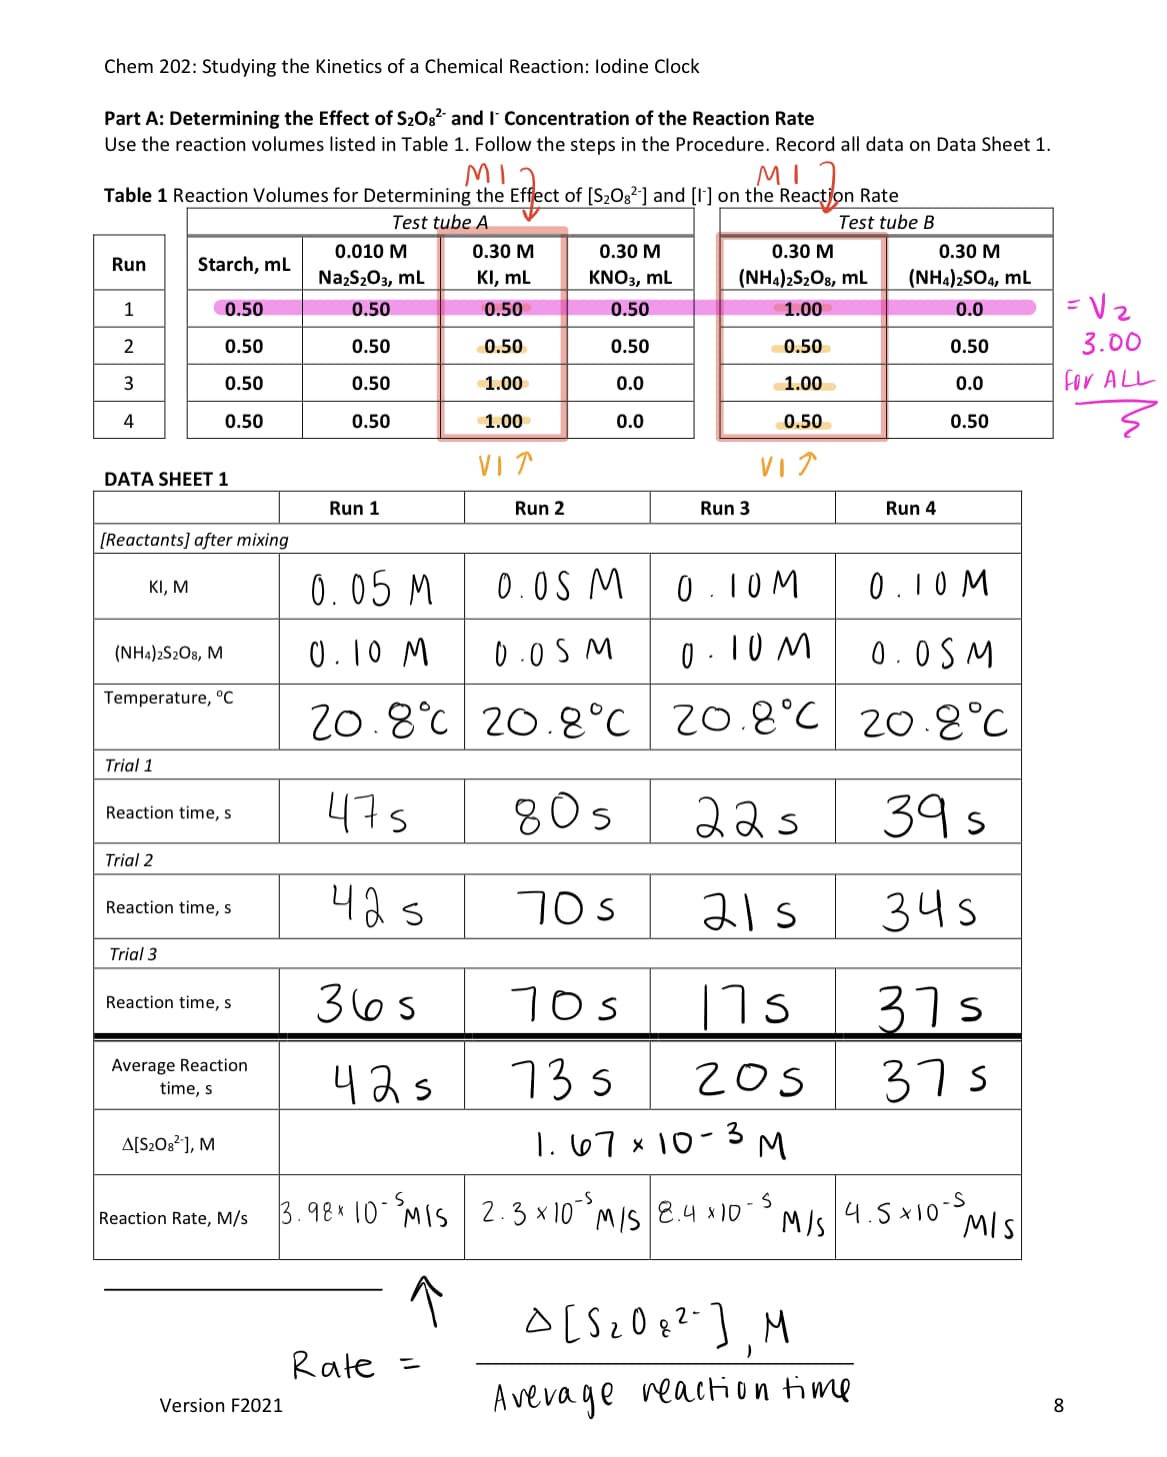 Chem 202: Studying the Kinetics of a Chemical Reaction: lodine Clock
Part A: Determining the Effect of S2O3? and I Concentration of the Reaction Rate
Use the reaction volumes listed in Table 1. Follow the steps in the Procedure. Record all data on Data Sheet 1.
MI
Table 1 Reaction Volumes for Determining the Effect of [S2O3²] and [I'] on the Reaction Rate
MI
Test tube A
Test tube B
0.010 M
0.30 M
0.30 M
0.30 M
0.30 M
Run
Starch, ml
NazS203, mL
KI, ml
KNO3, mL
(NH4)2S2O8, mL
(NH4)2SO4, mL
1
=Vz
0.50
0.50
0.50
0.50
1.00
0.0
2
0.50
0.50
0.50
0.50
0.50
0.50
3.00
0.50
0.50
1.00
0.0
1.00
0.0
for ALL
4
0.50
0.50
1.00
0.0
0.50
0.50
DATA SHEET 1
Run 1
Run 2
Run 3
Run 4
[Reactants] after mixing
0.05 M
0.0S M
0.10M
0.10 M
KI, M
0.10 M
0.0S M
0 . 10 M
0.0SM
(NH4)2S2O8, M
Temperature, °C
20.8°C 20.8°C 20.8°C 20.8°C
Trial 1
47s
80s
22s
39s
Reaction time, s
Trial 2
42s
70s
21s
345
Reaction time, s
Trial 3
365
10s
31s
Reaction time, s
735
Average Reaction
42s
20s
37s
time, s
1.67 x 10-3 M
A[S2Os?], M
3.98* 10 MIS
2.3×10MIS
8.4 x 10
MIS
Reaction Rate, M/s
M/s 4.5x10-S
o[Sz
2-
Rate
A vevage reaction time
Version F2021
8
